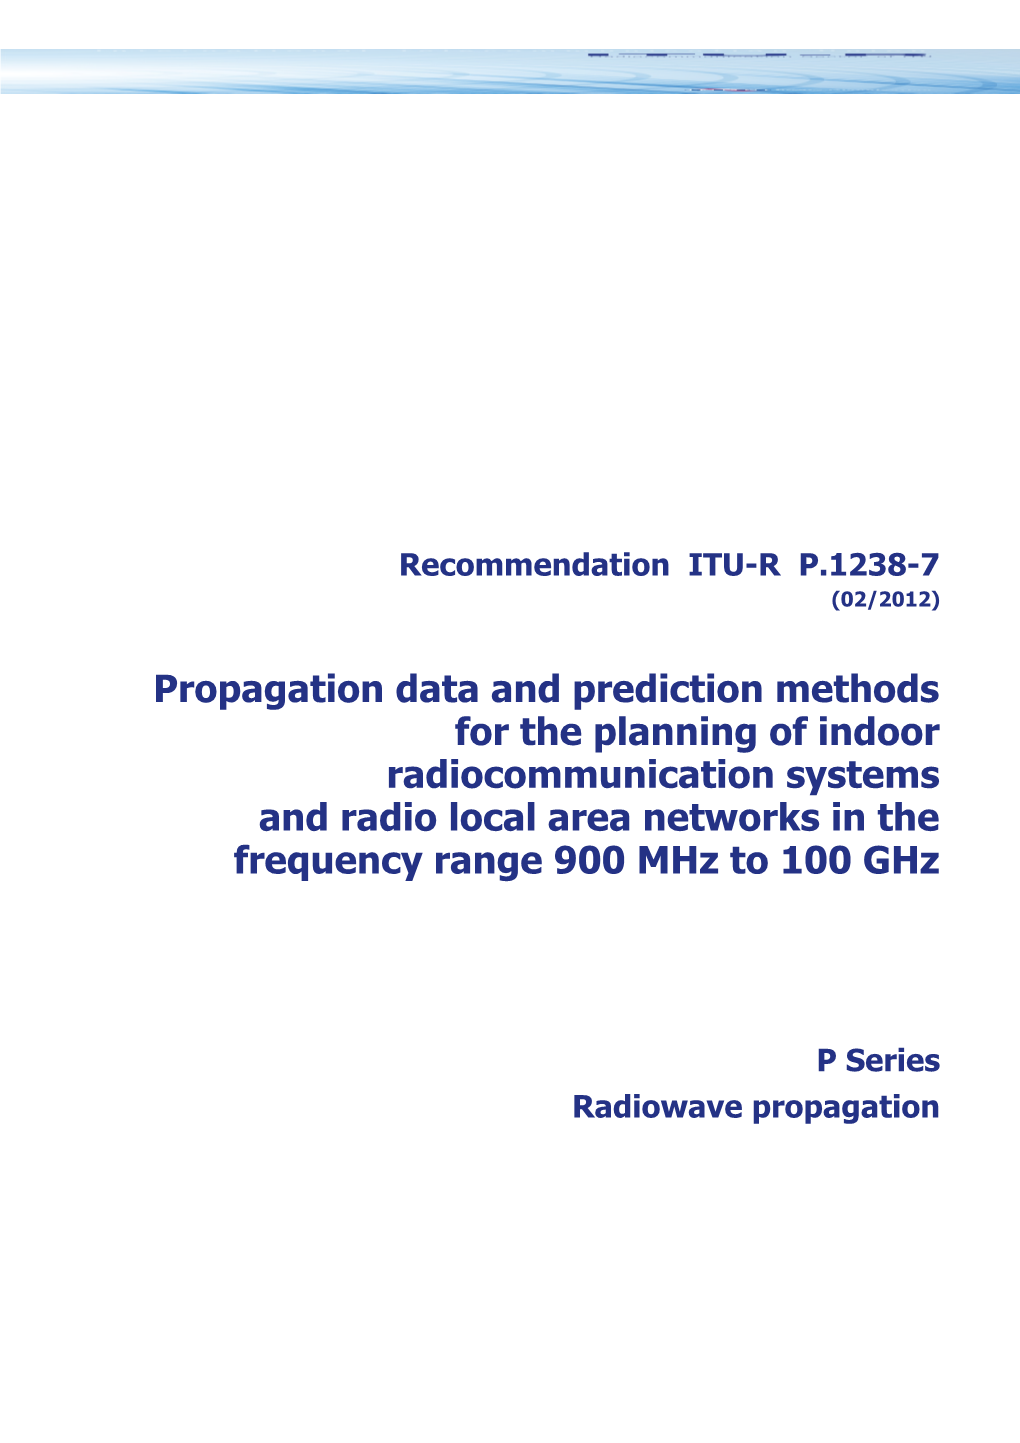 RECOMMENDATION ITU-R P.1238-7 - Propagation Data and Prediction Methods for the Planning